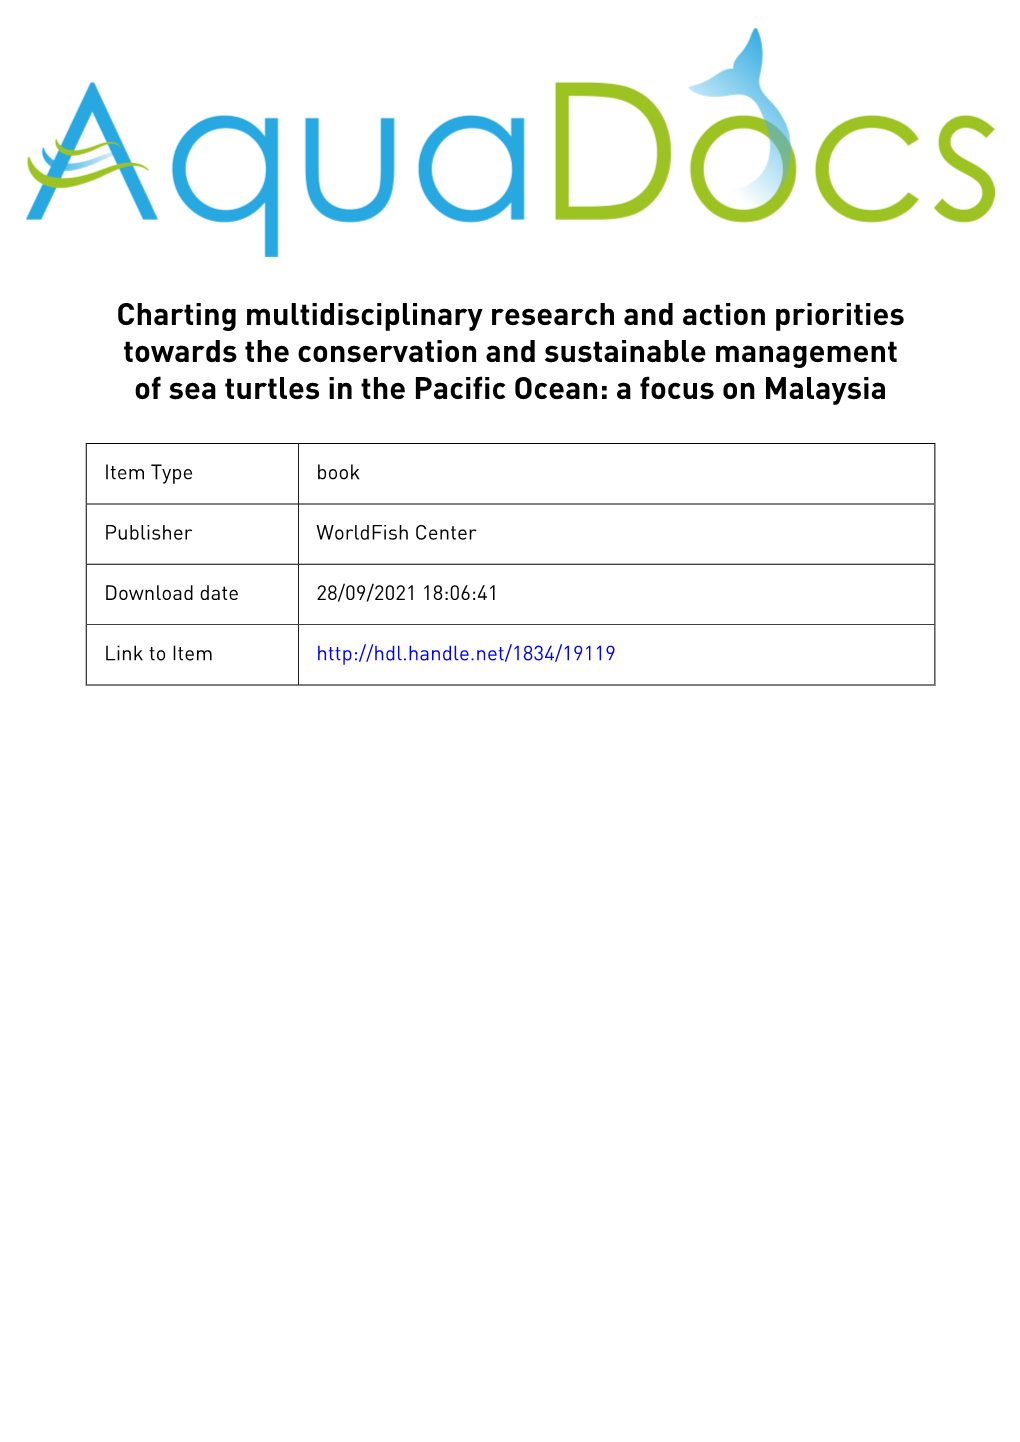 Charting Multidisciplinary Research and Action Priorities Towards the Conservation and Sustainable Management of Sea Turtles in the Pacific Ocean: a Focus on Malaysia